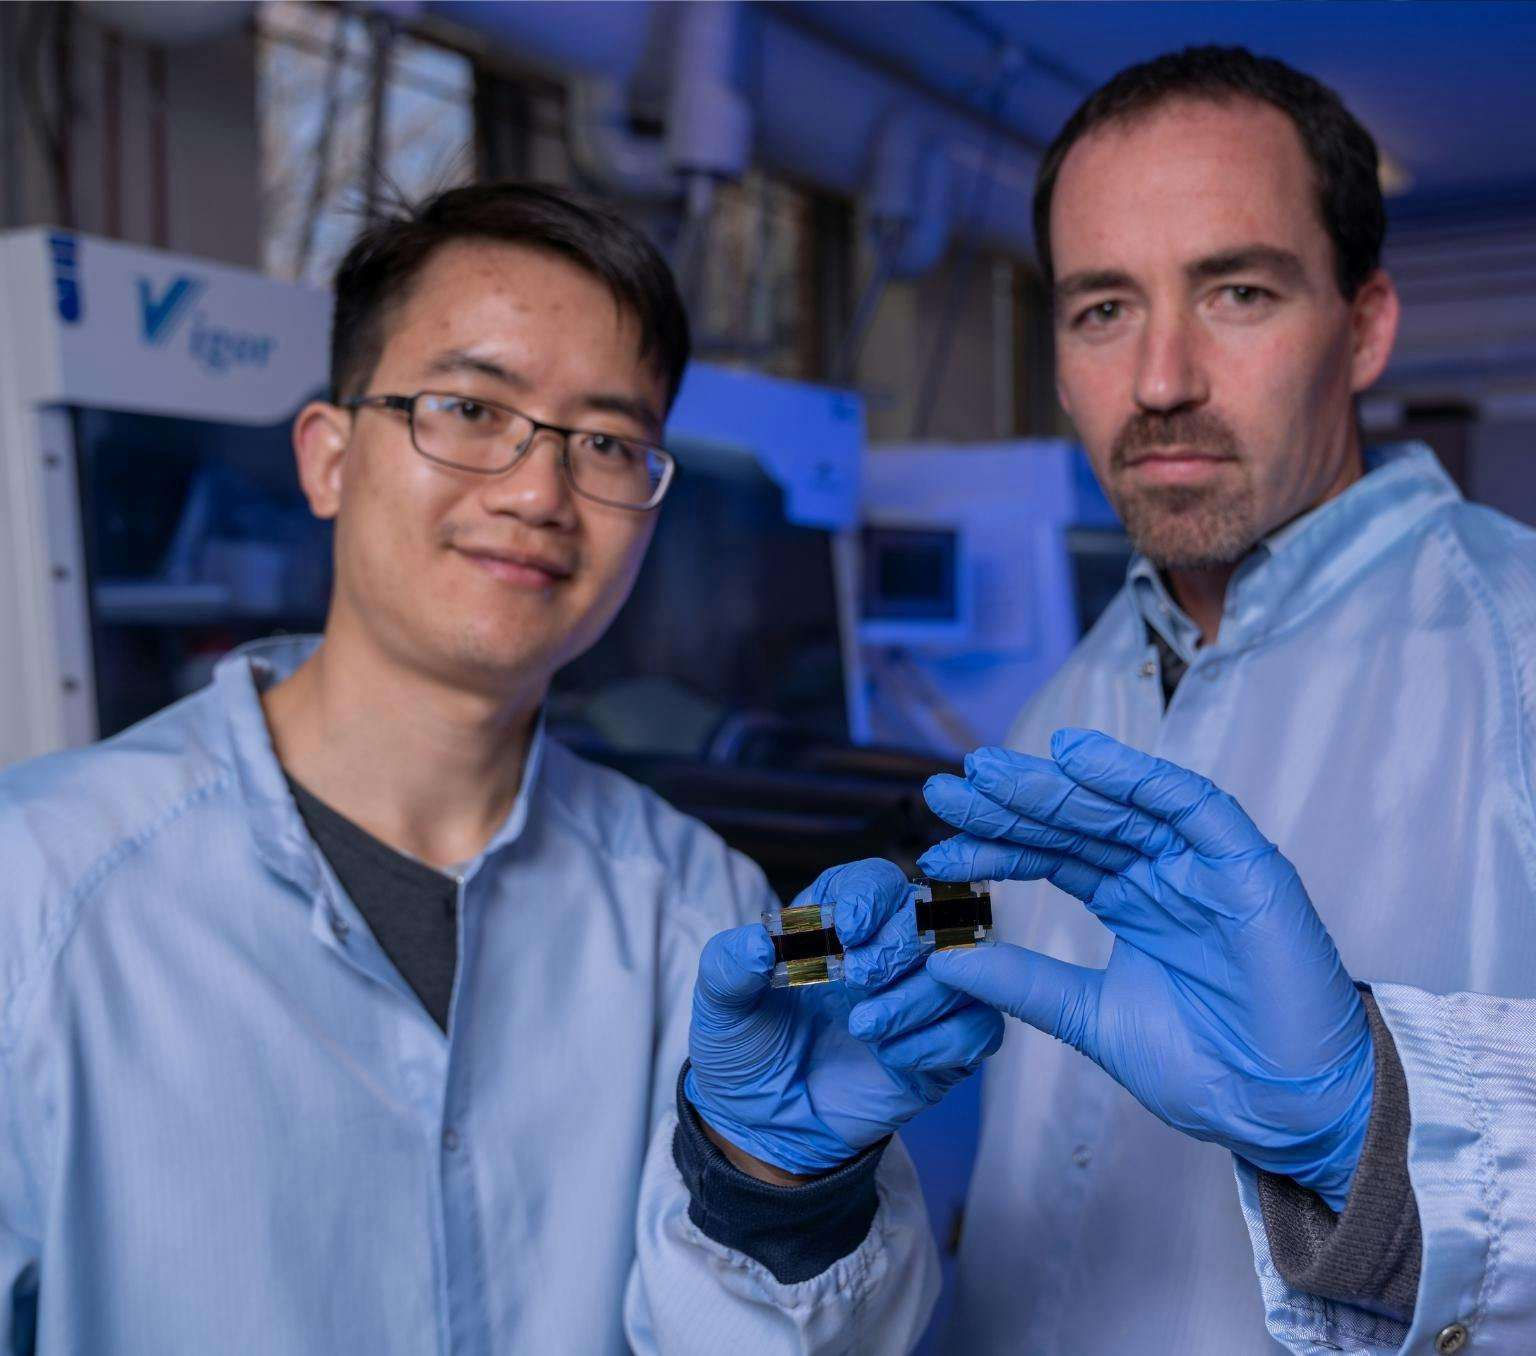 Jun Peng and Thomas White are both wearing blue lab coats and blue golves. ther are holding small gold and black square shaped cells and standing in a laboratory